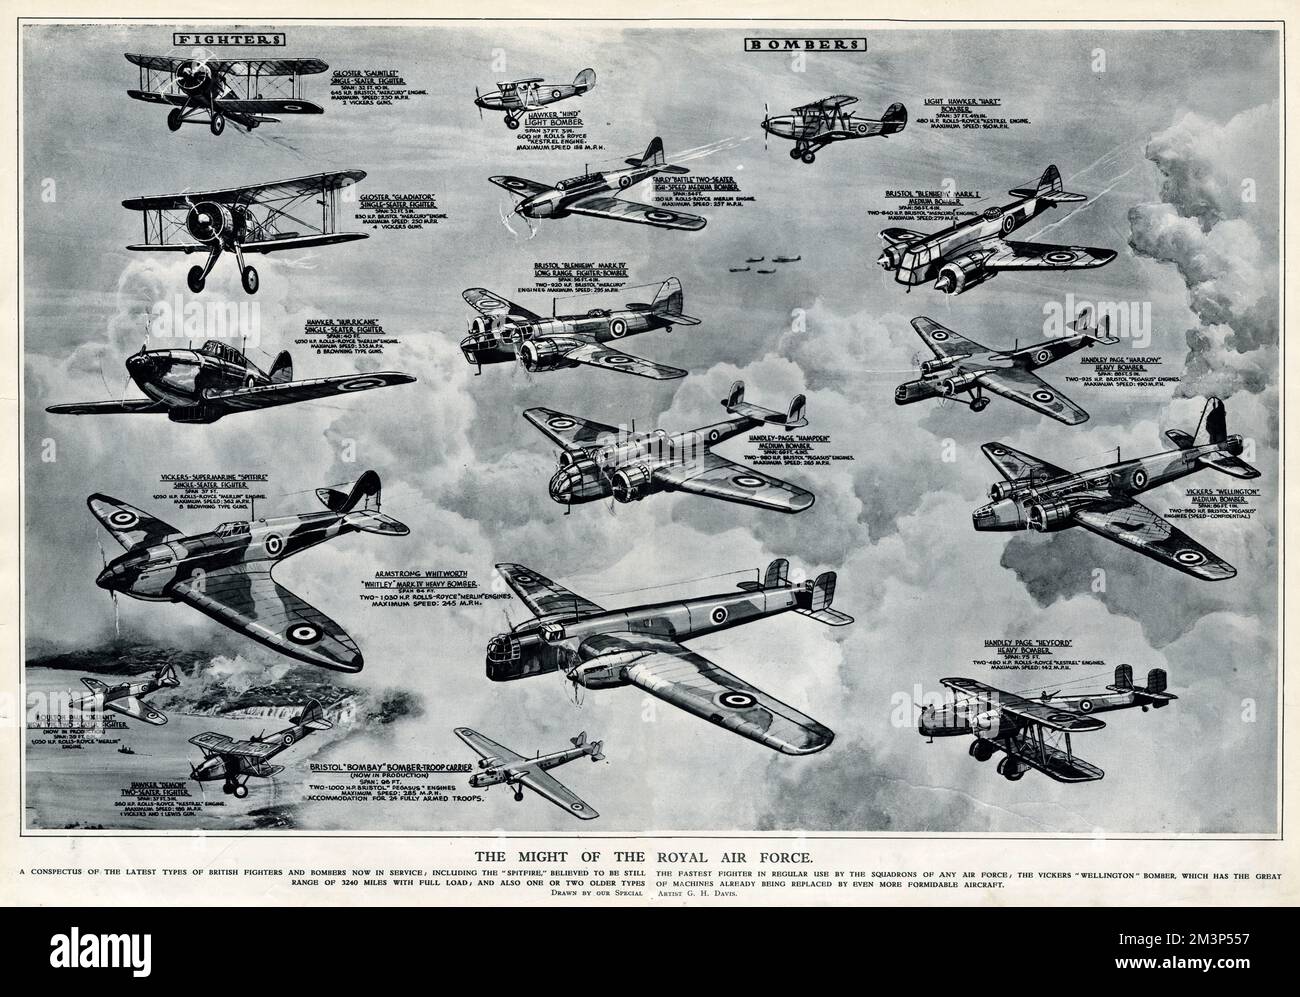 The might of the Royal Air Force, showing the latest types of British fighters and bombers in service at the start of the Second World War.  Included are the Spitfire, and the Vickers Wellington bomber.      Date: 1939 Stock Photo